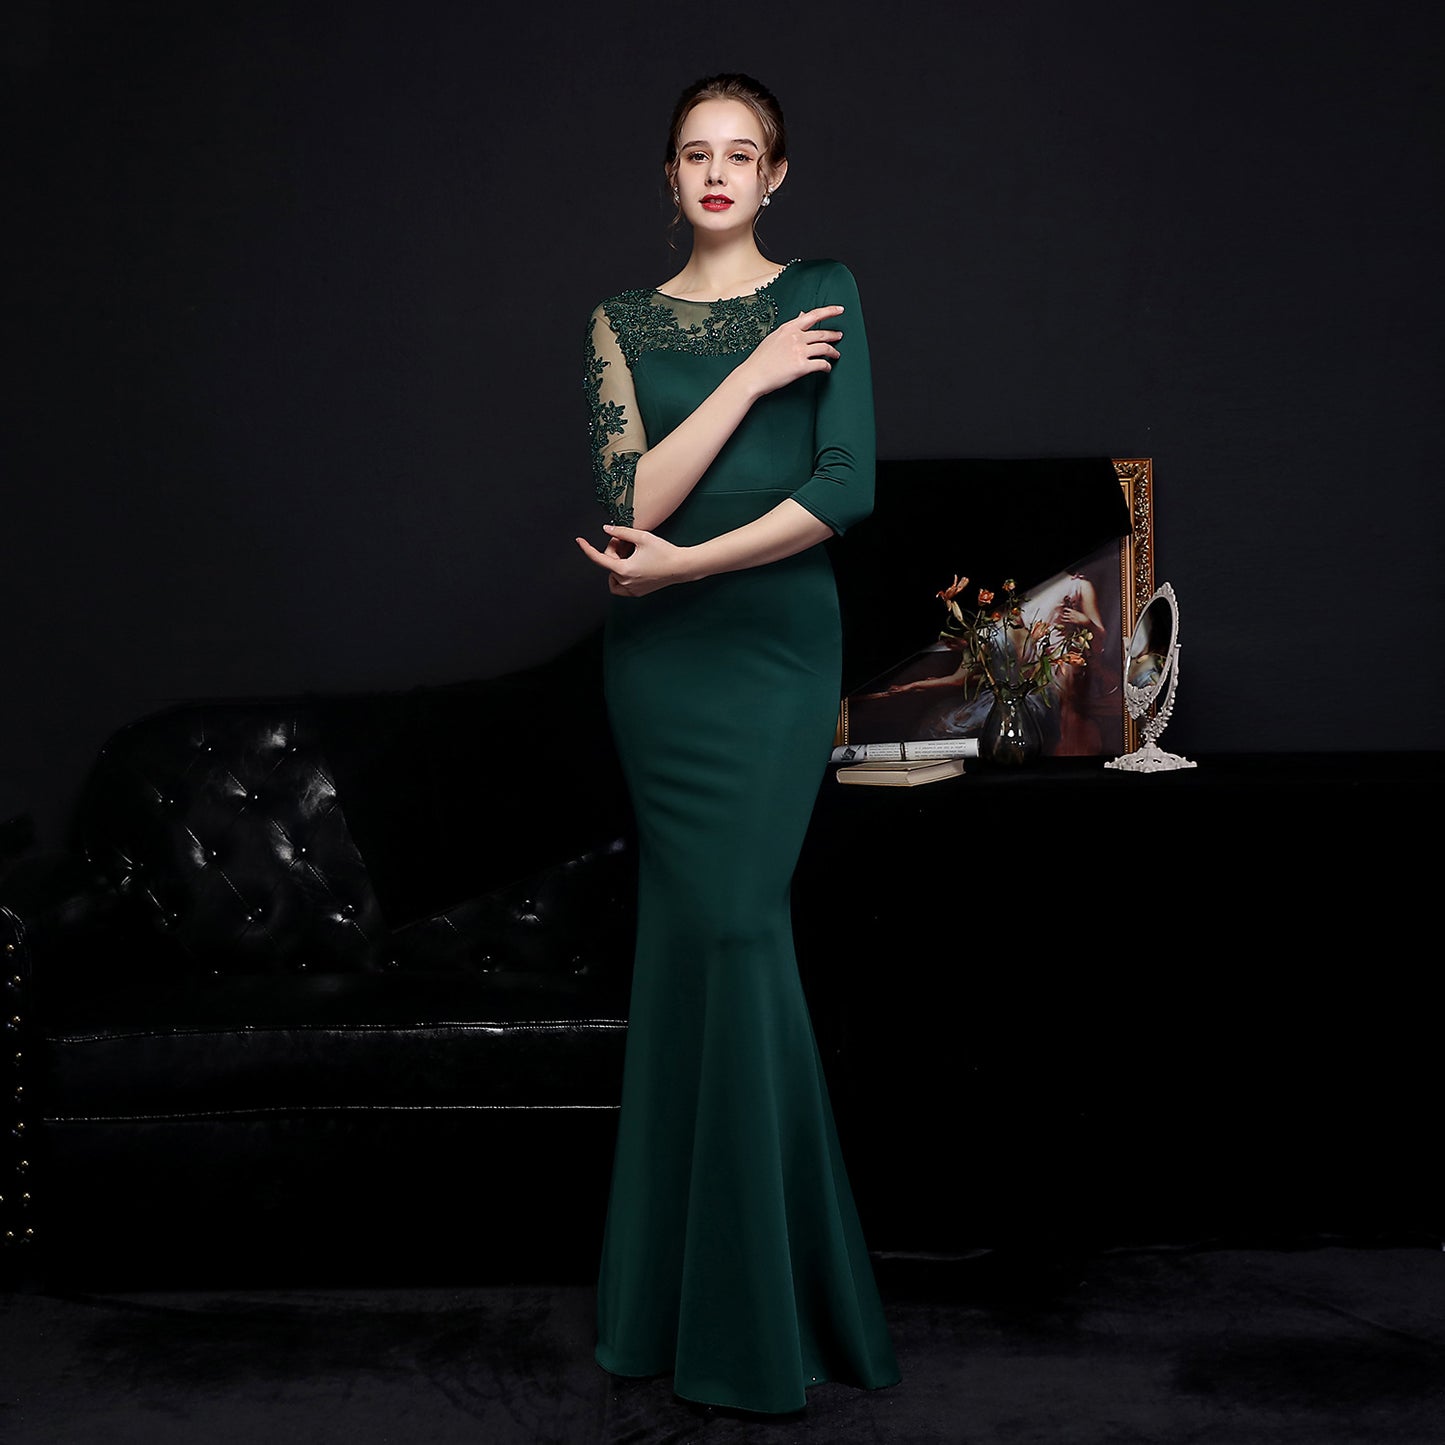 One Sleeve Illusion Gown